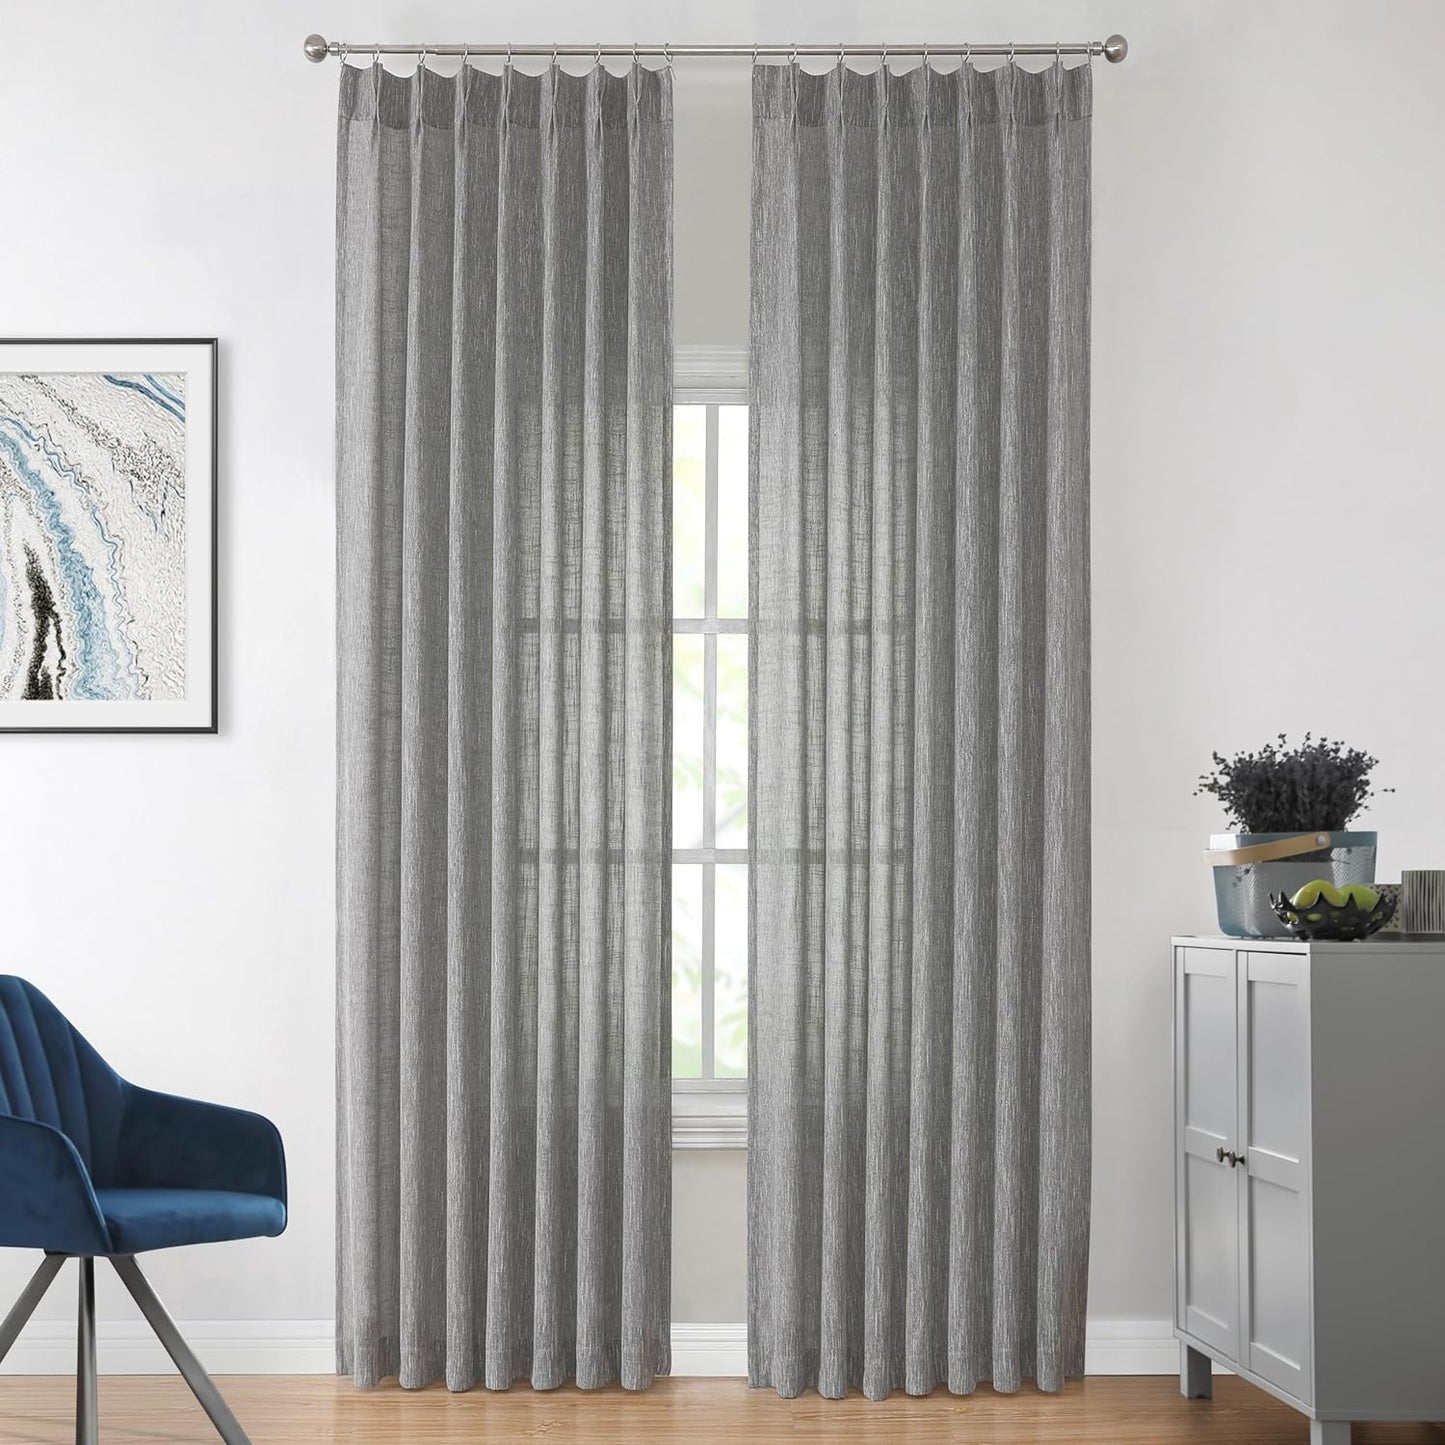 Vision Home Natural Pinch Pleated Semi Sheer Curtains Textured Linen Blended Light Filtering Window Curtains 84 Inch for Living Room Bedroom Pinch Pleat Drapes with Hooks 2 Panels 42" Wx84 L  Vision Home Charcoal Grey/Pinch 40"X108"X2 